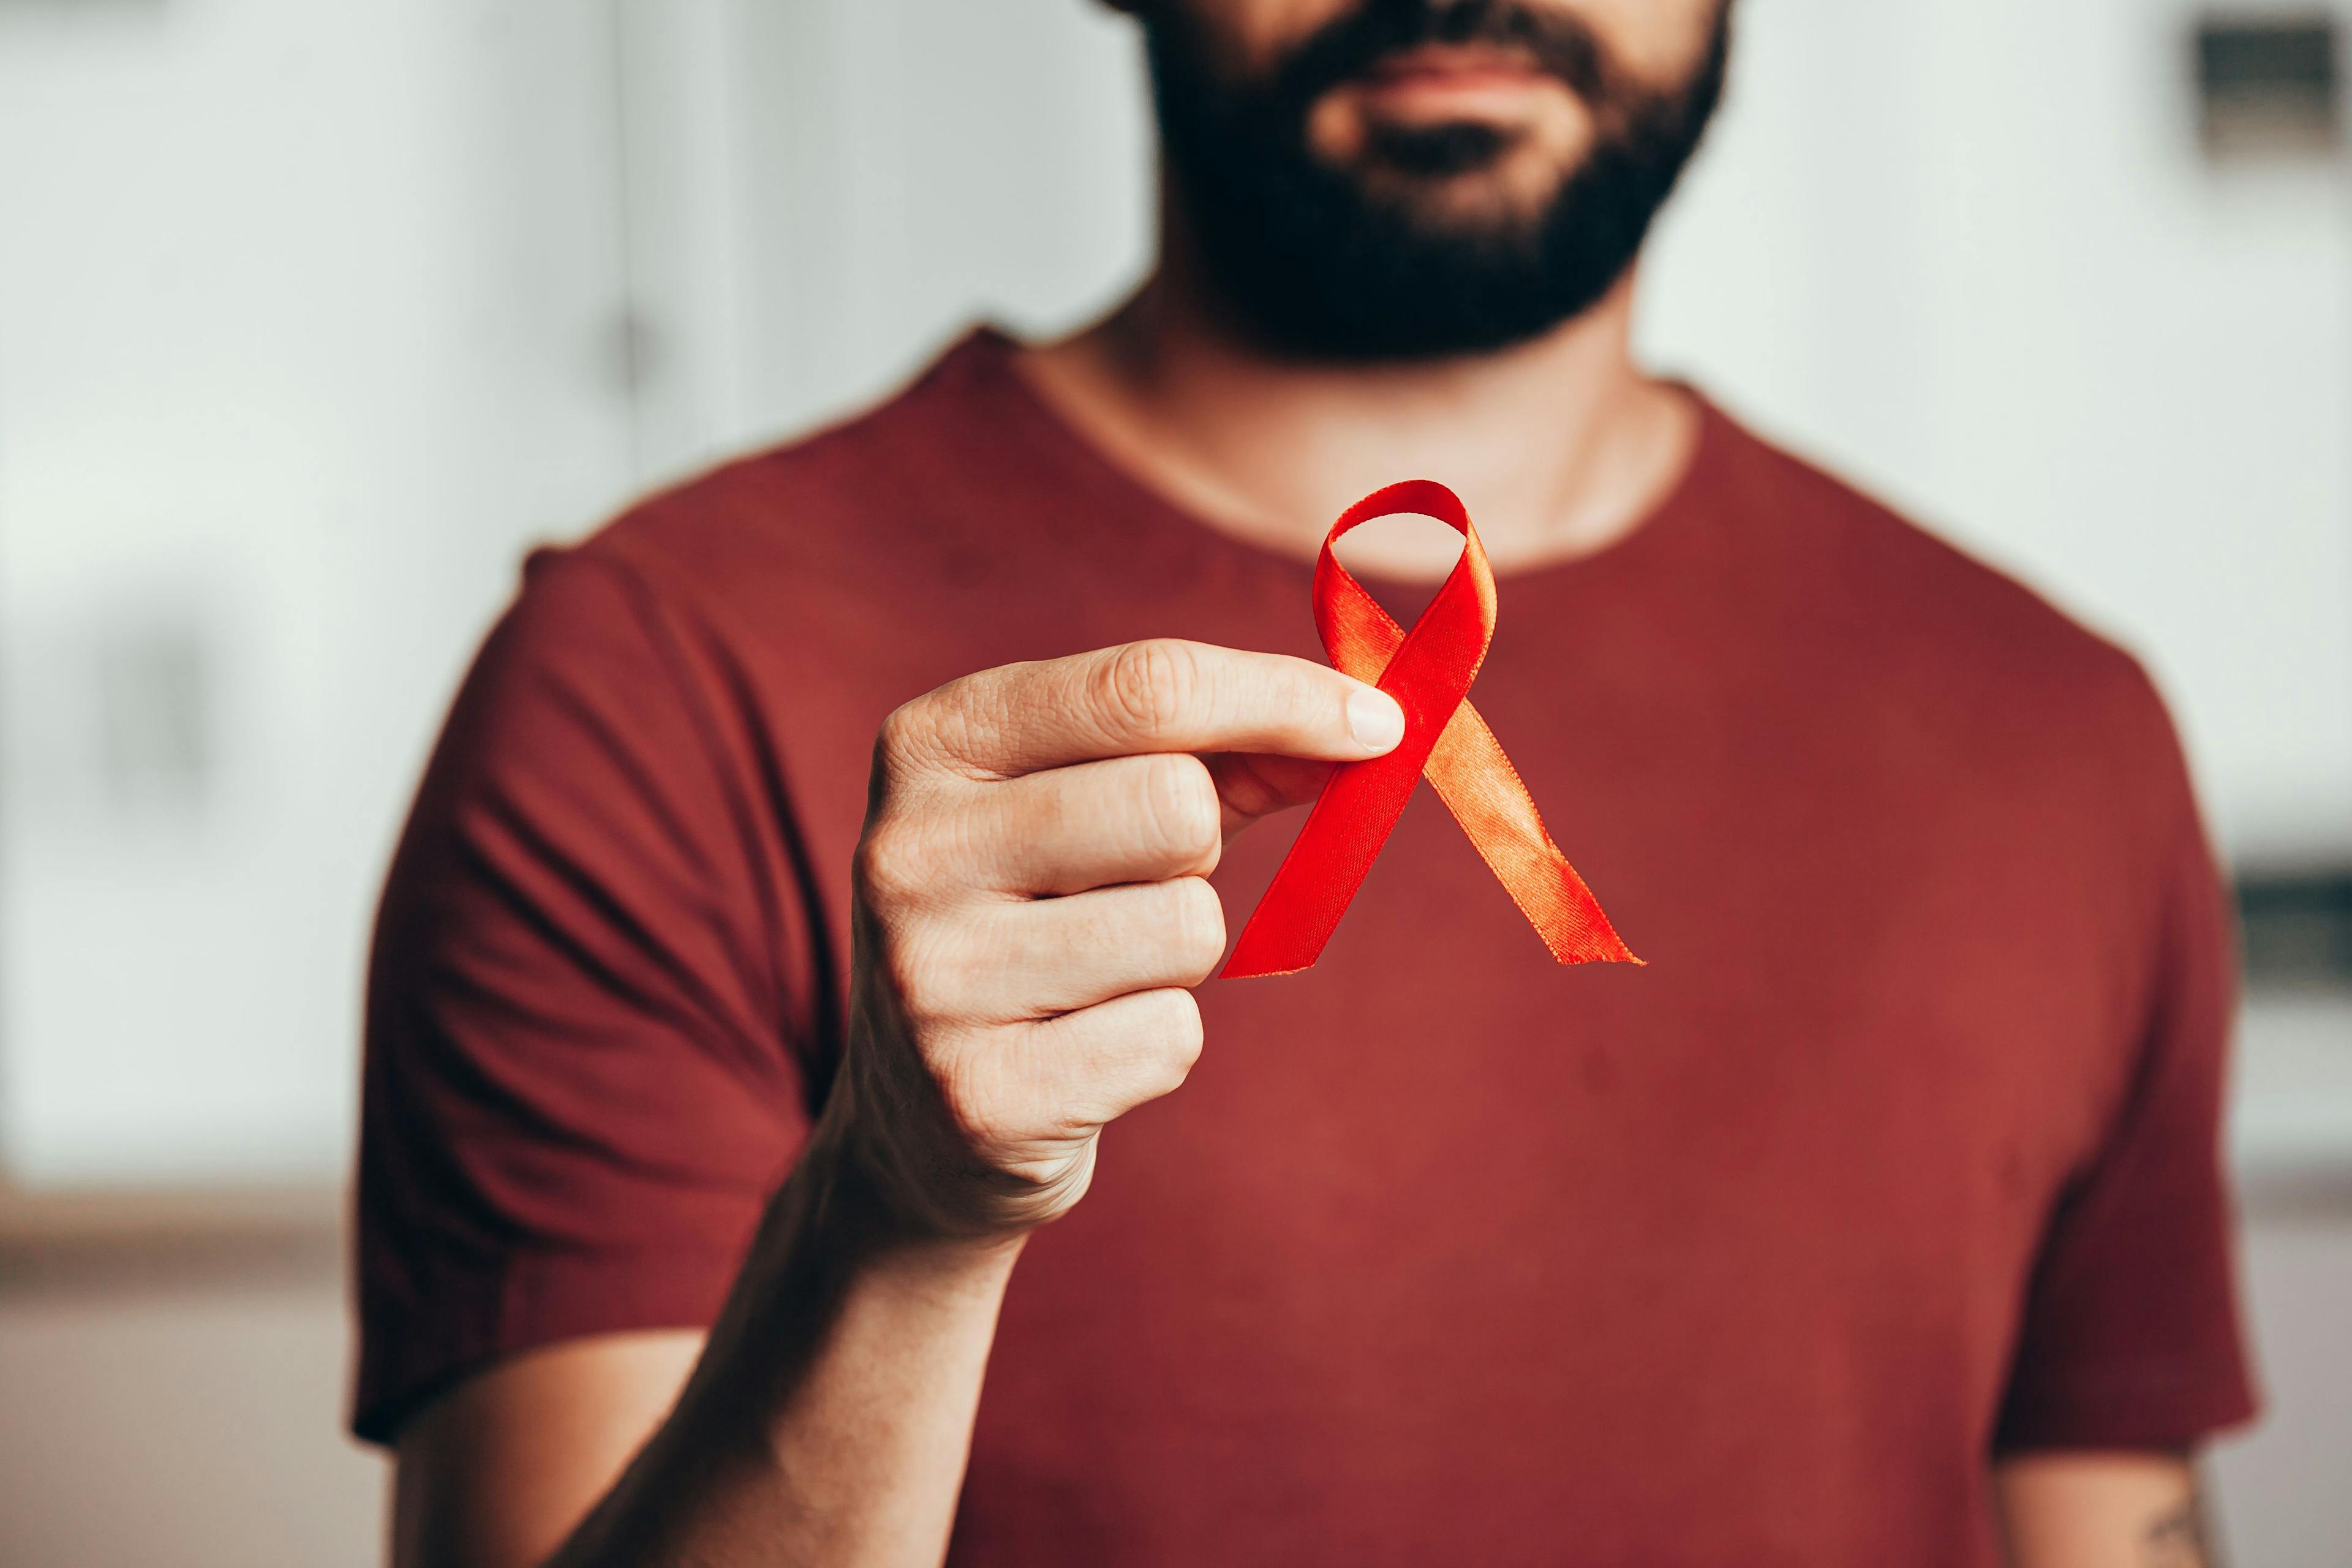 Though HIV diagnoses have declined overall, new infections still disproportionately occur in certain racial, ethic, gender, and geographic populations.